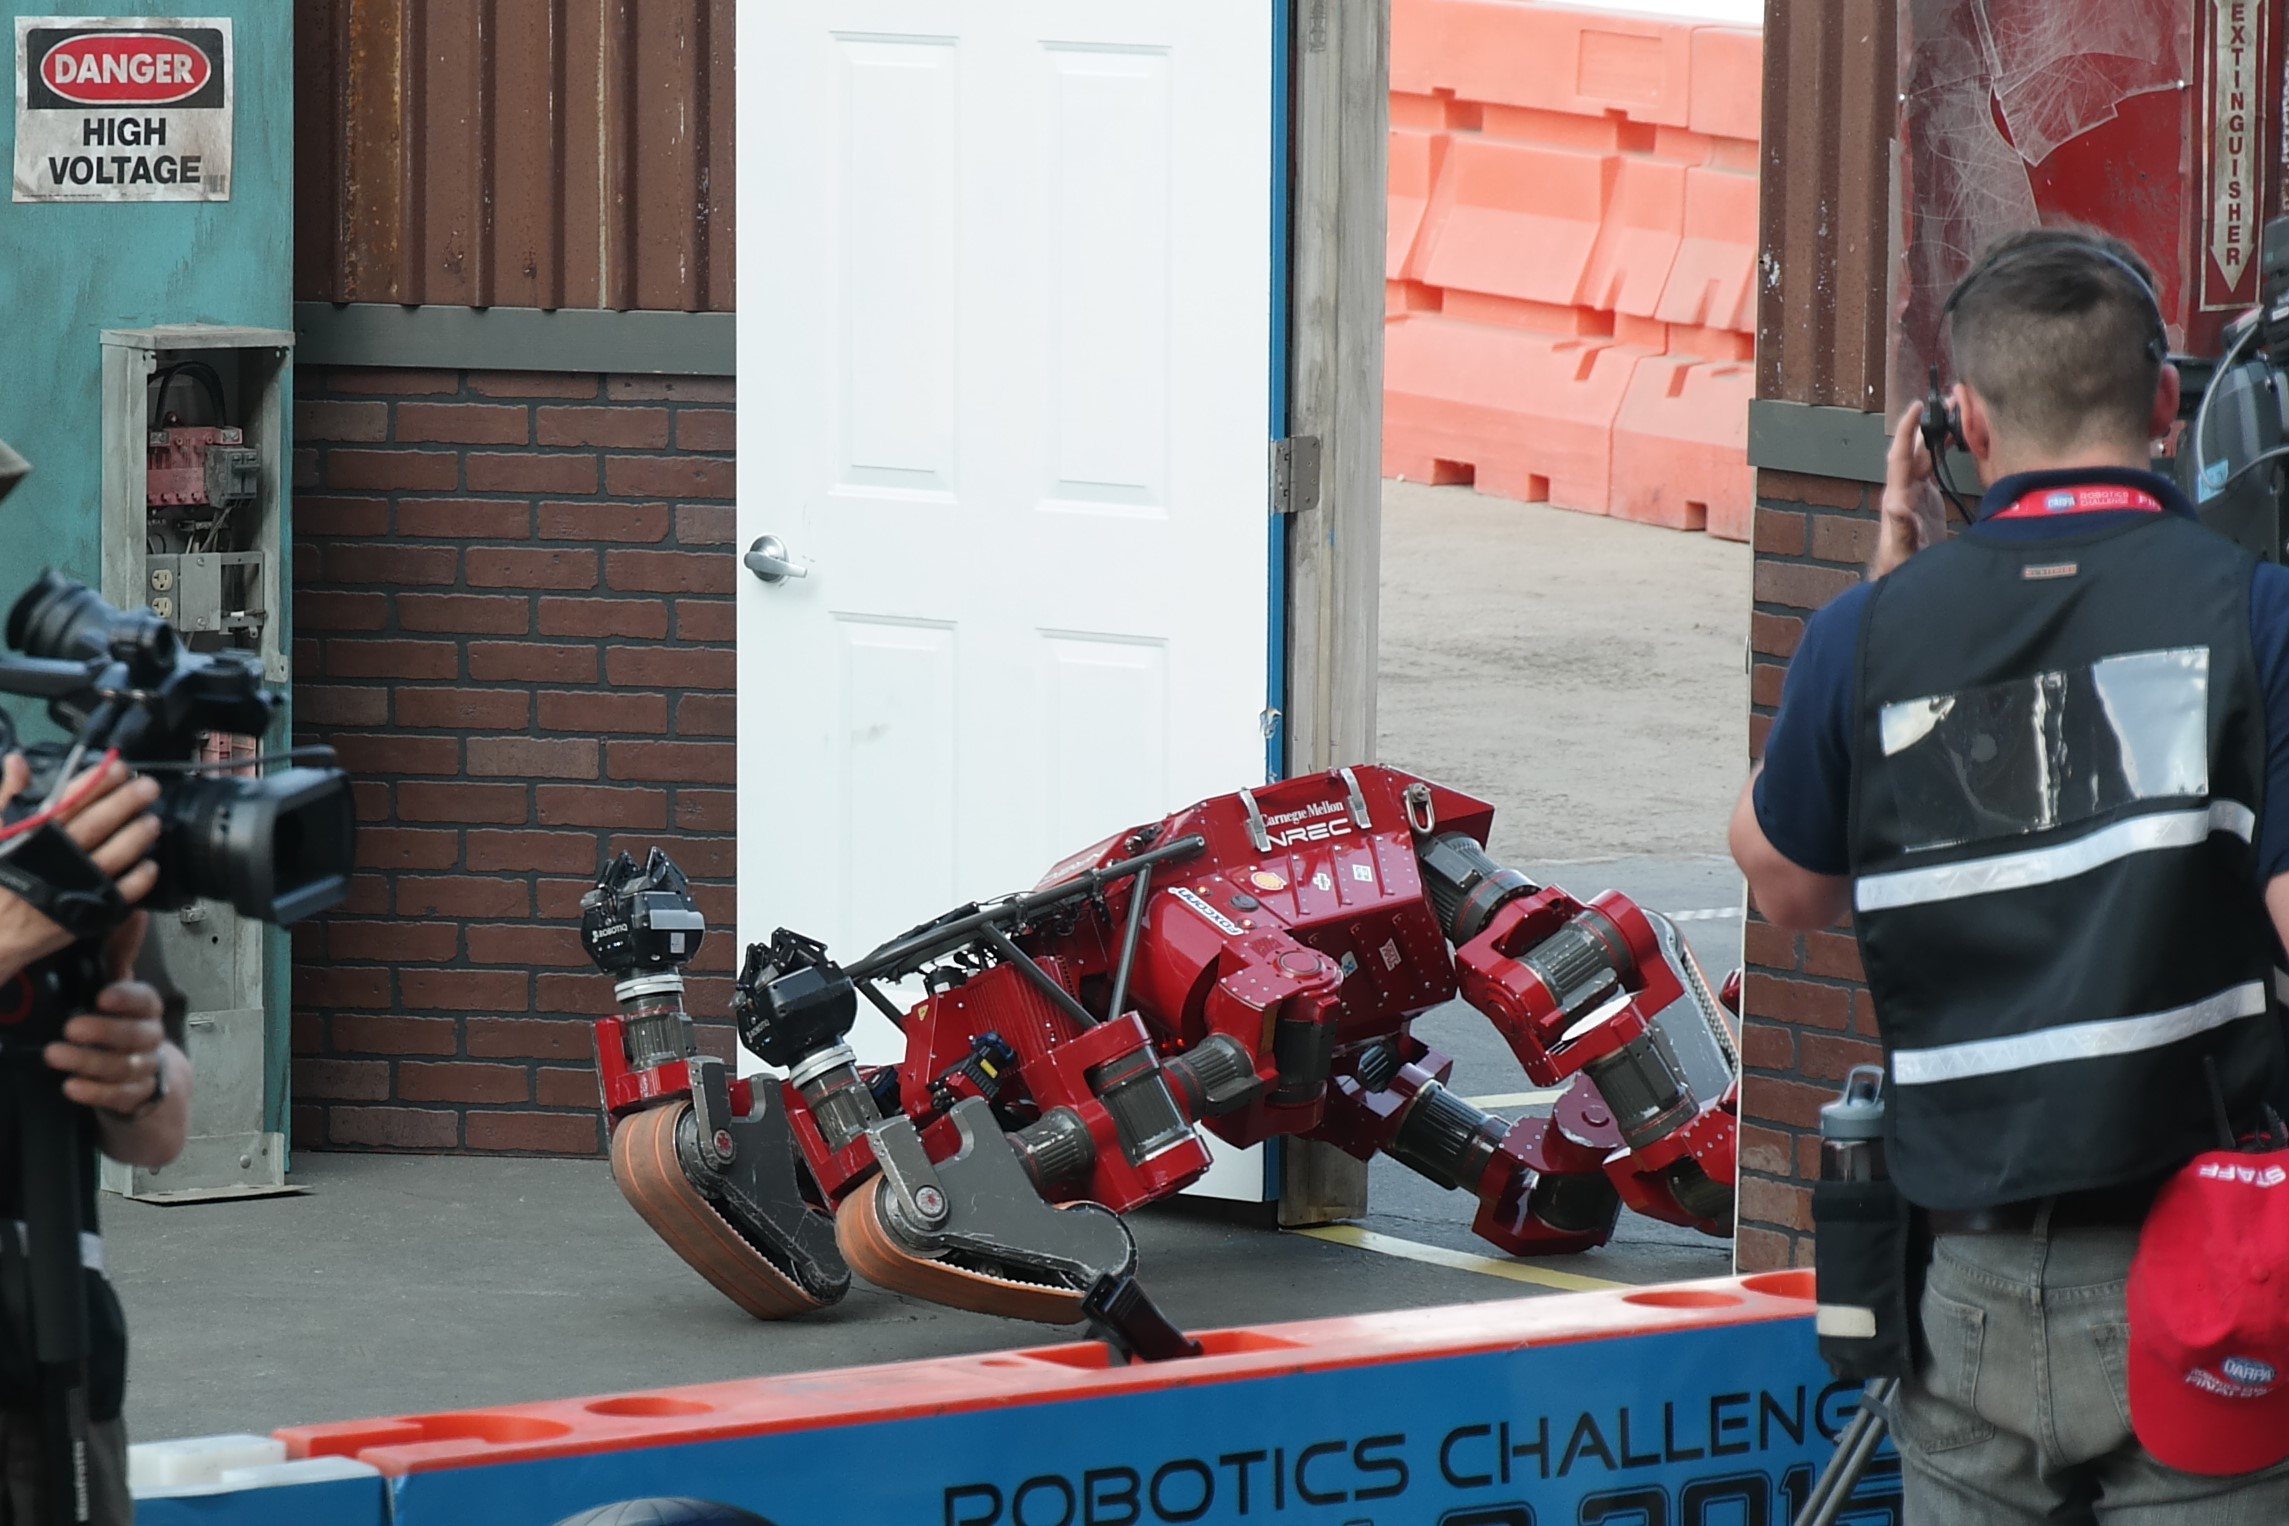 For Autonomous Robots, The School of Hard Knocks Is In Session